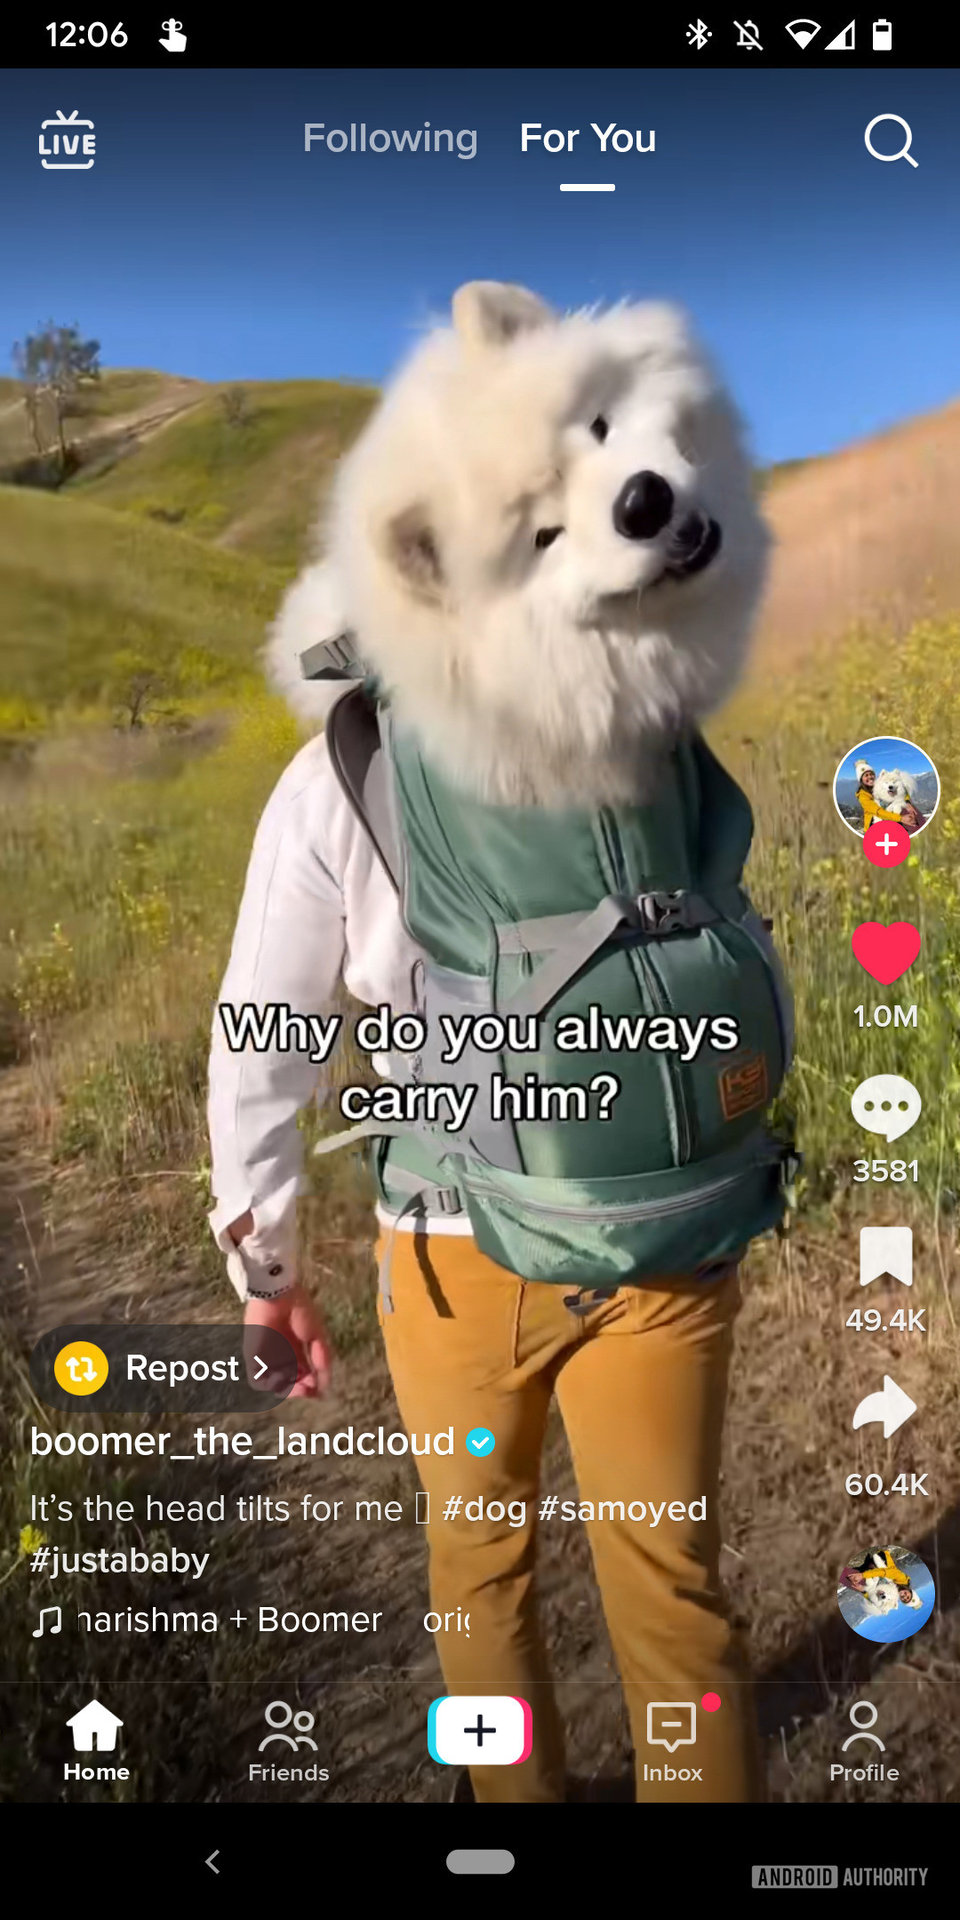 A screenshot of a TikTok video showing a dog in someone's backpack as they walk along a grasy trail.